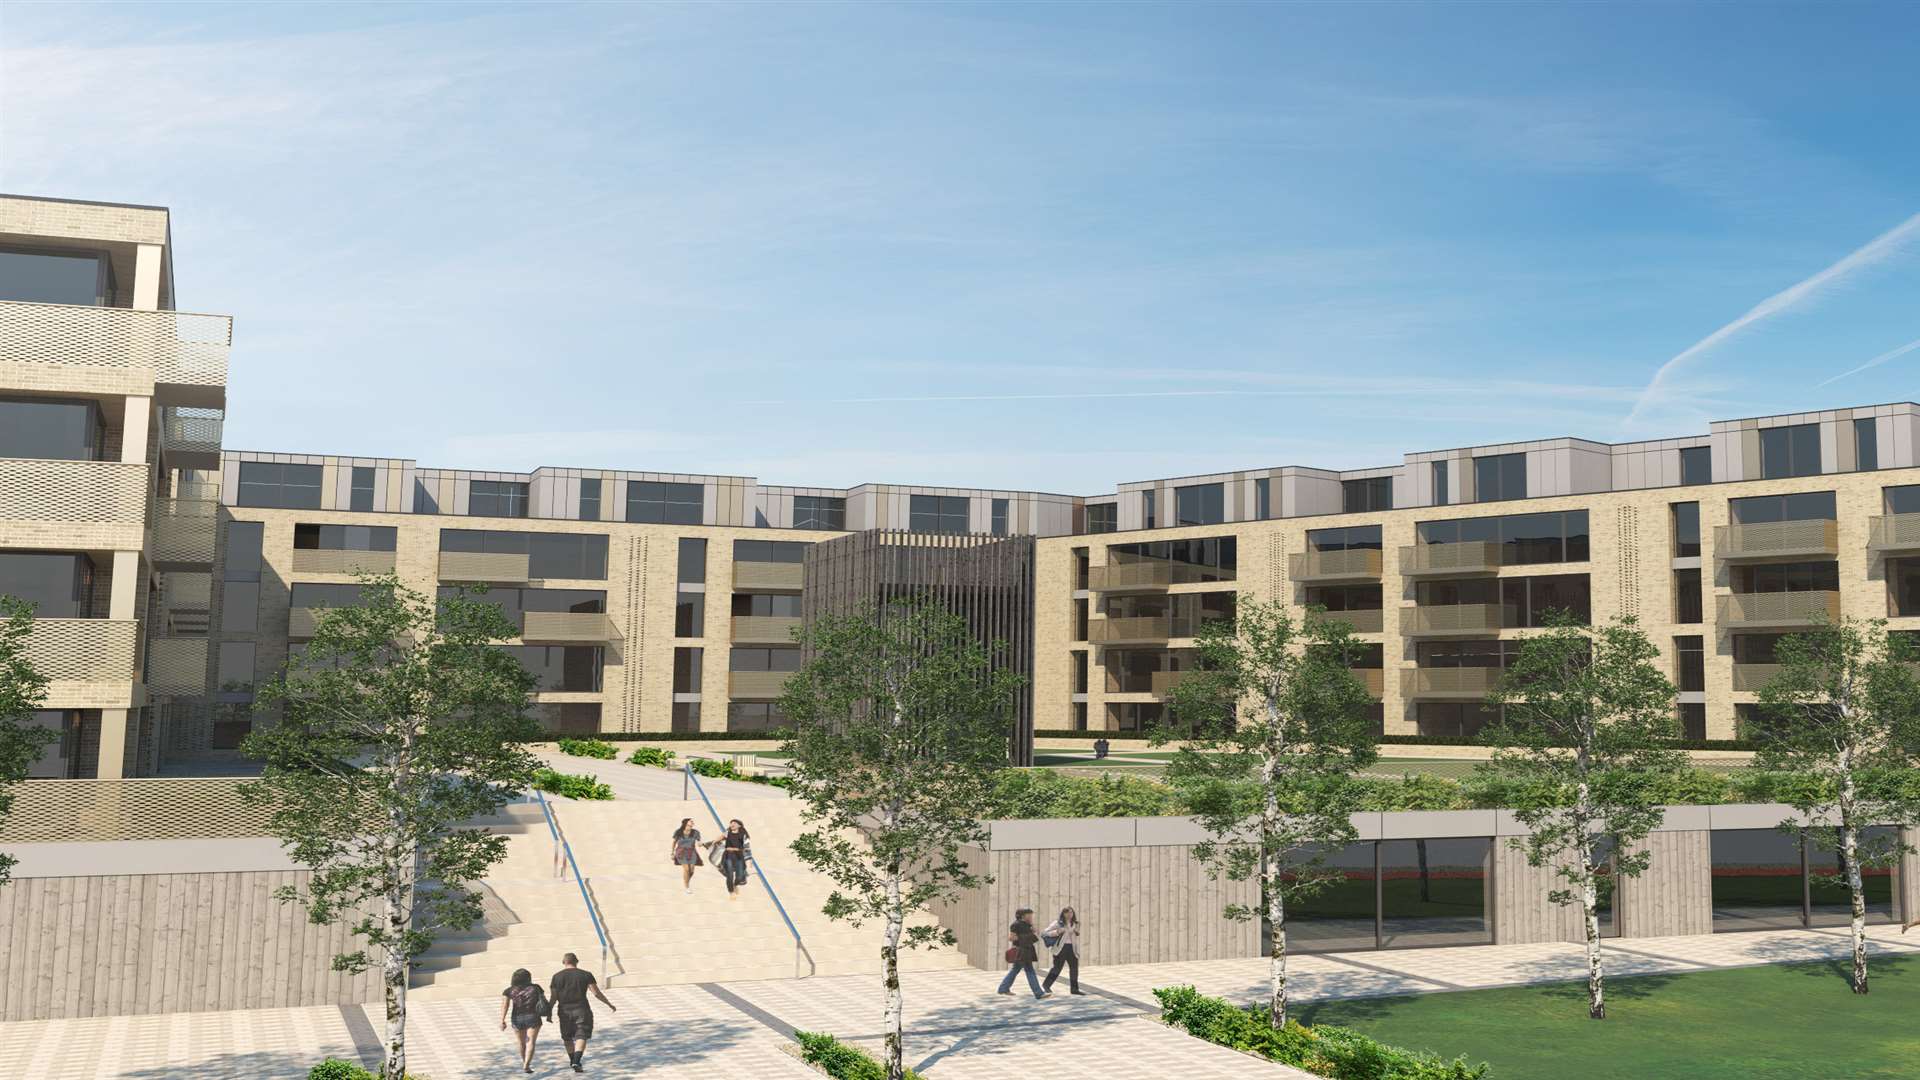 Artist impressions of the proposed developments for Victoria Way, in Ashford